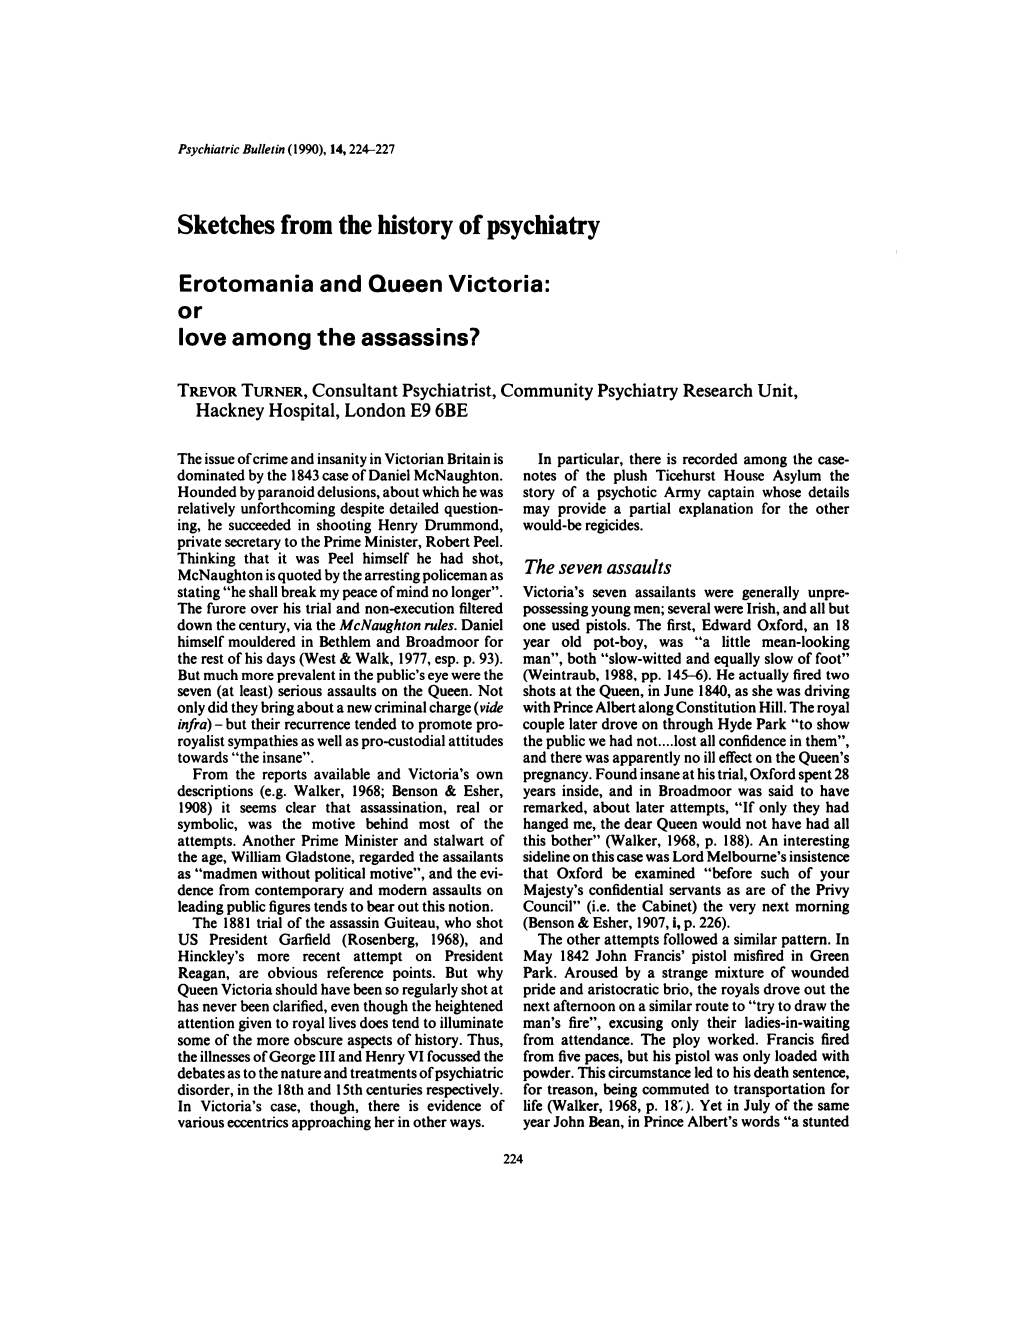 Sketches from the History of Psychiatry